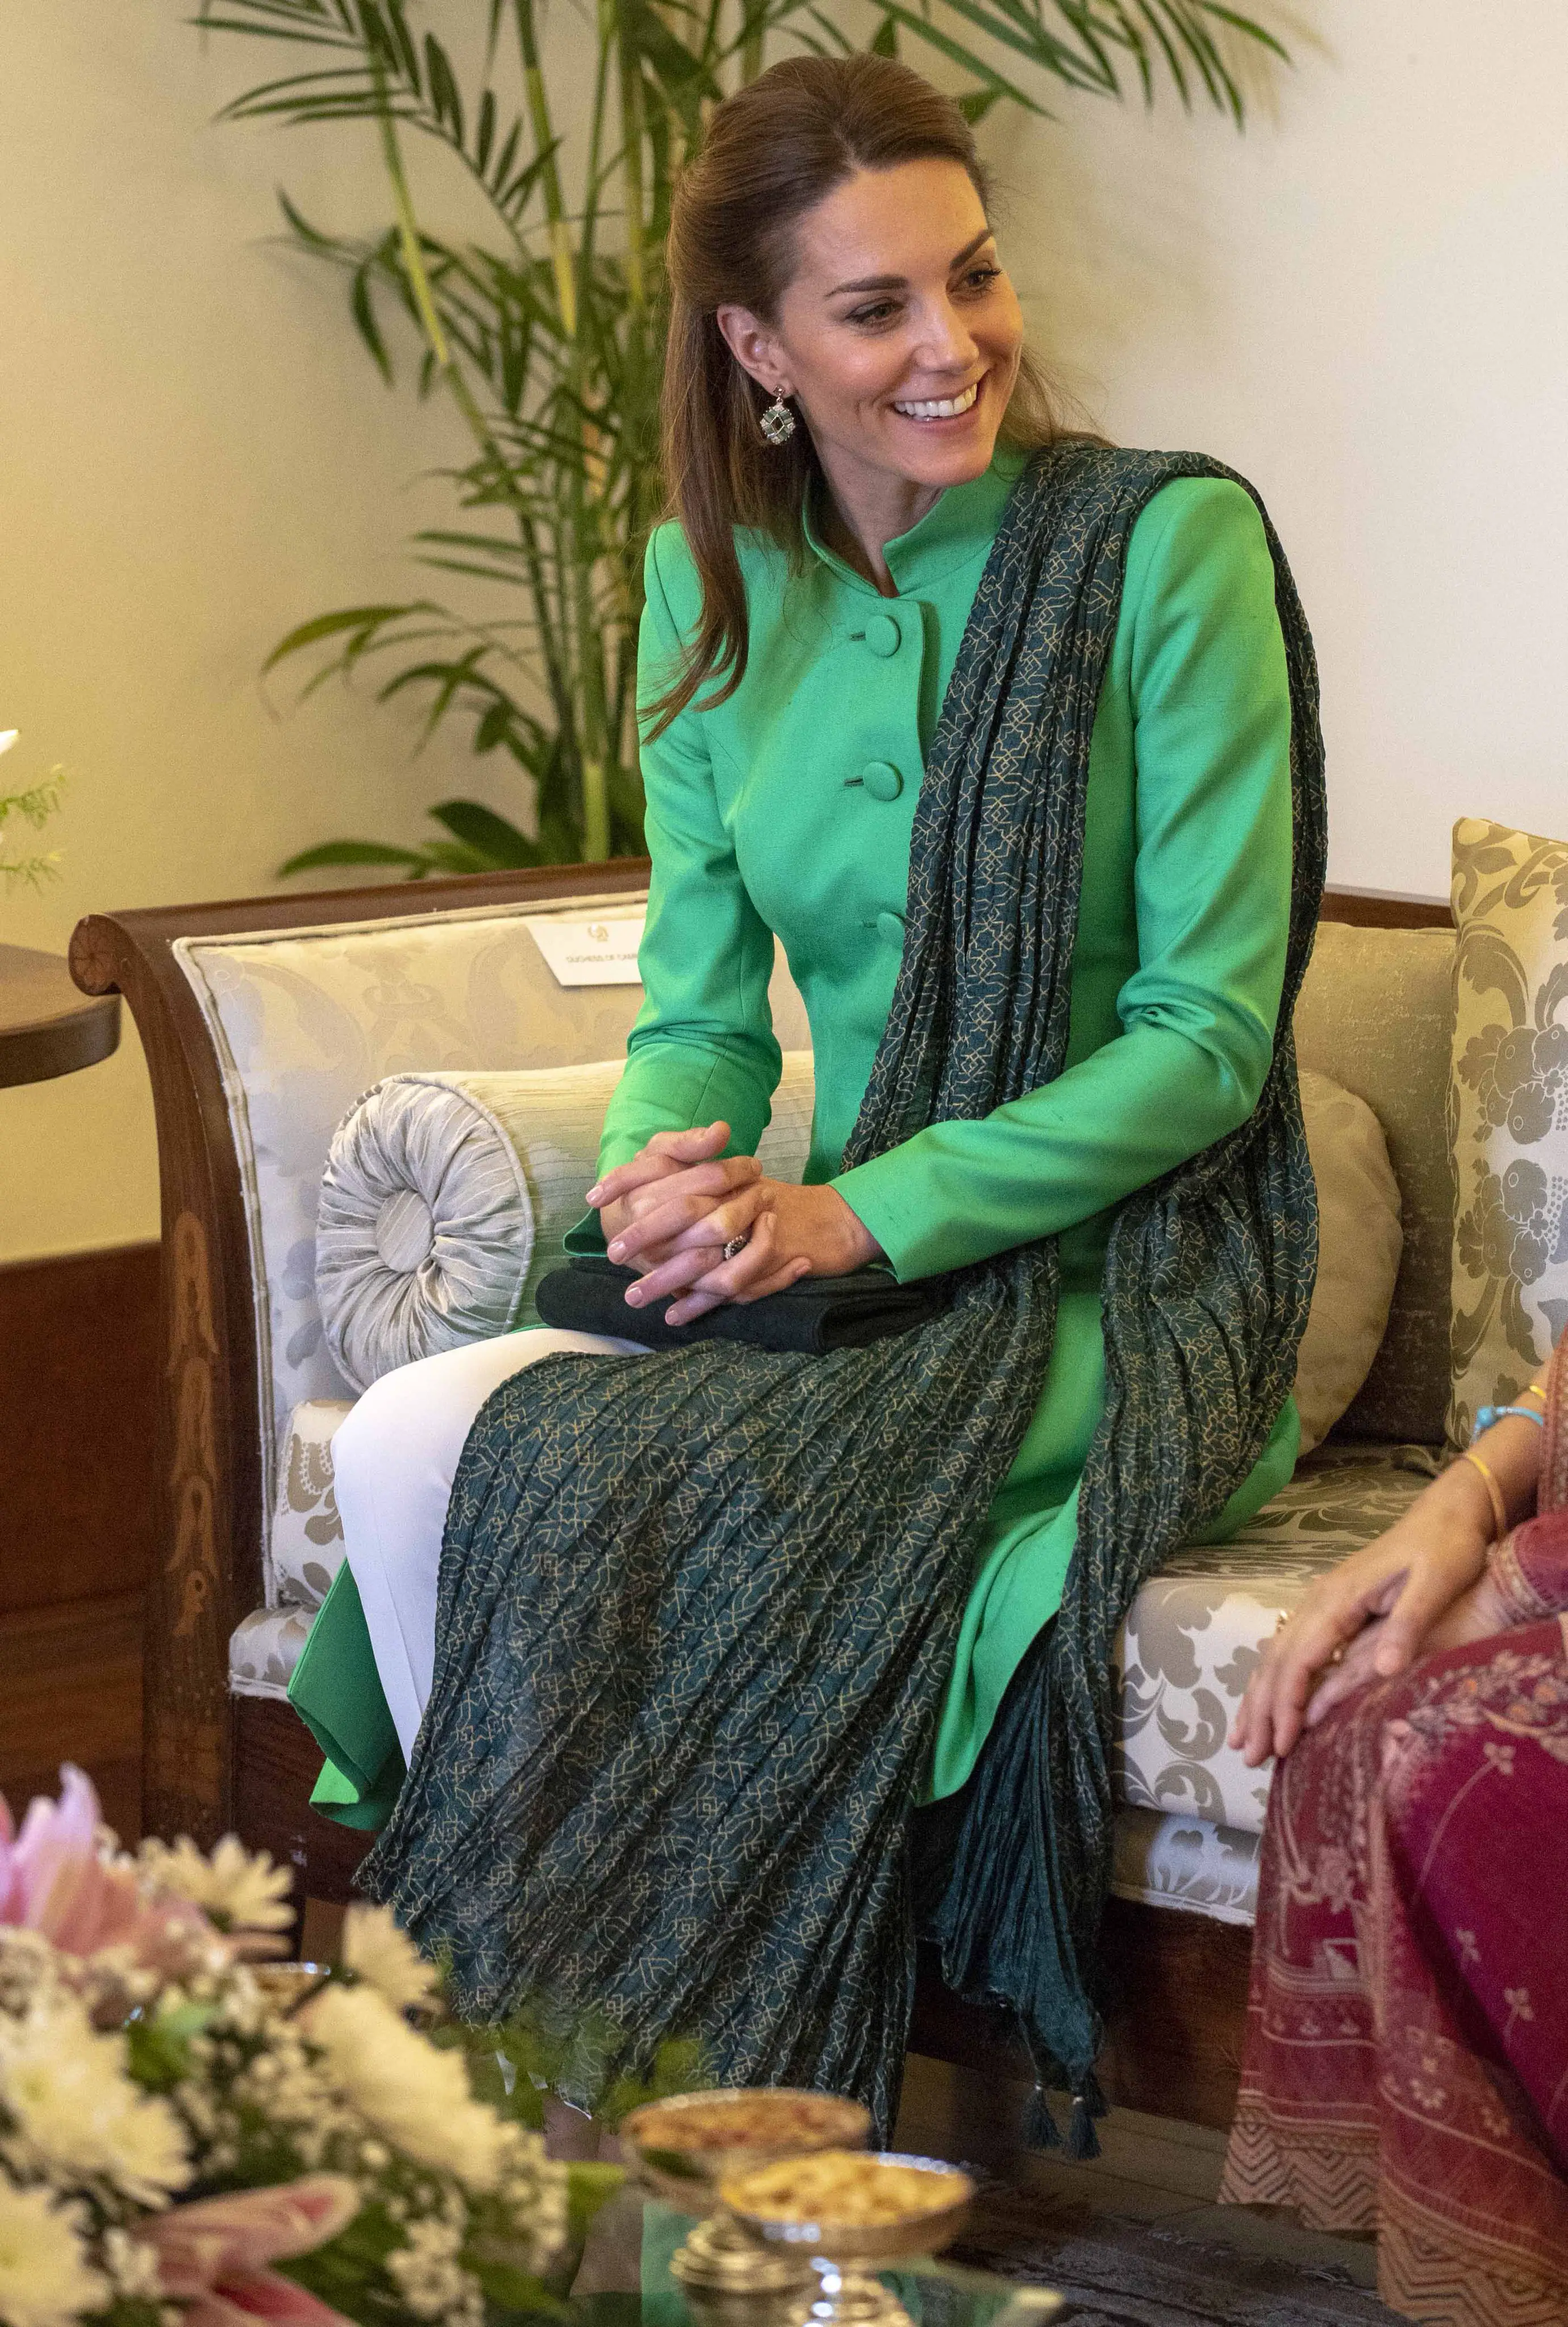 Duke and Duchess of Cambridge met with Pakistani Prime minister and president